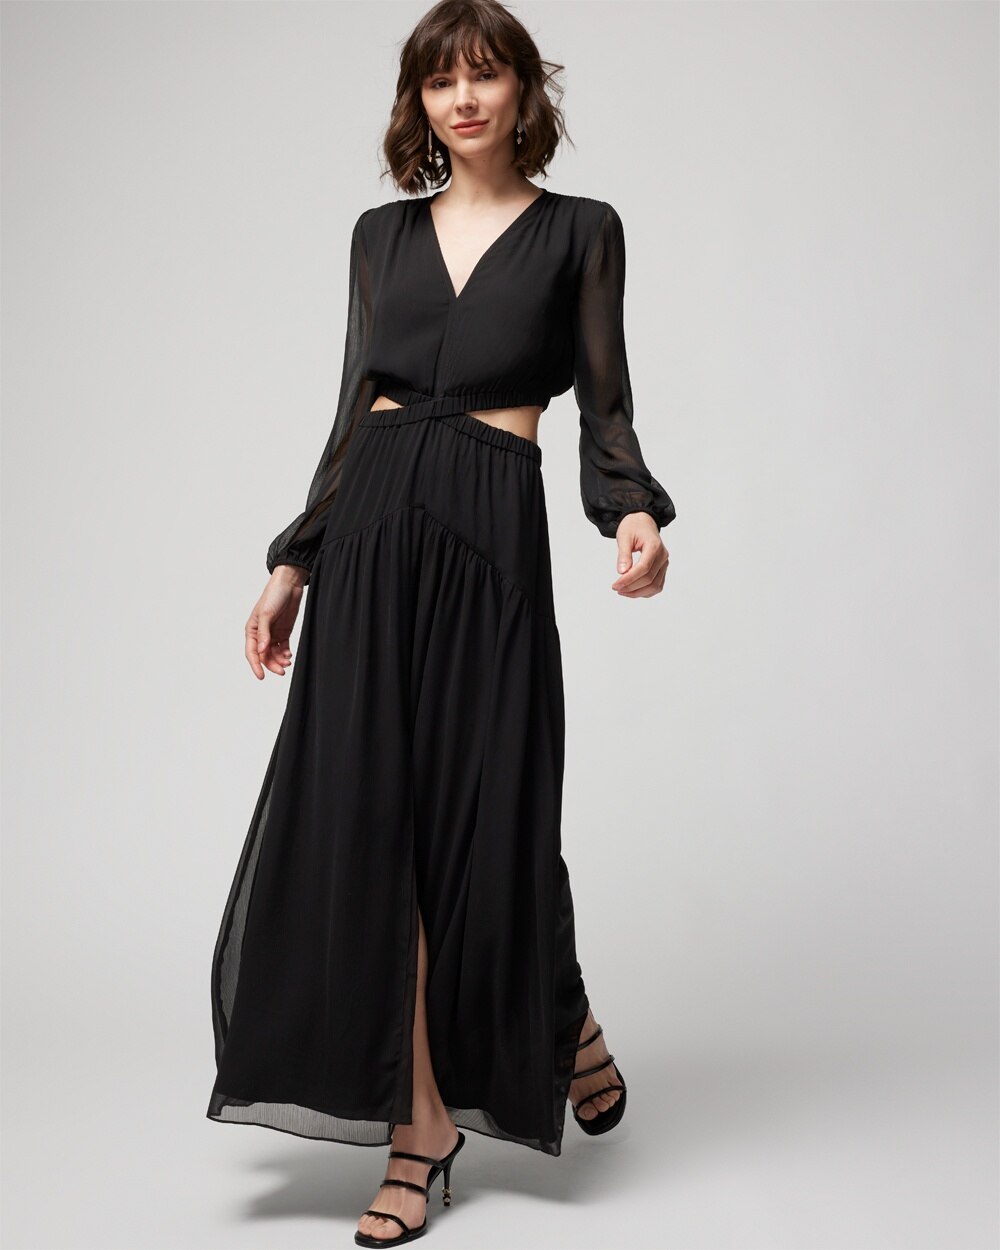 Long-Sleeve Cutout Maxi Dress video preview image, click to start video